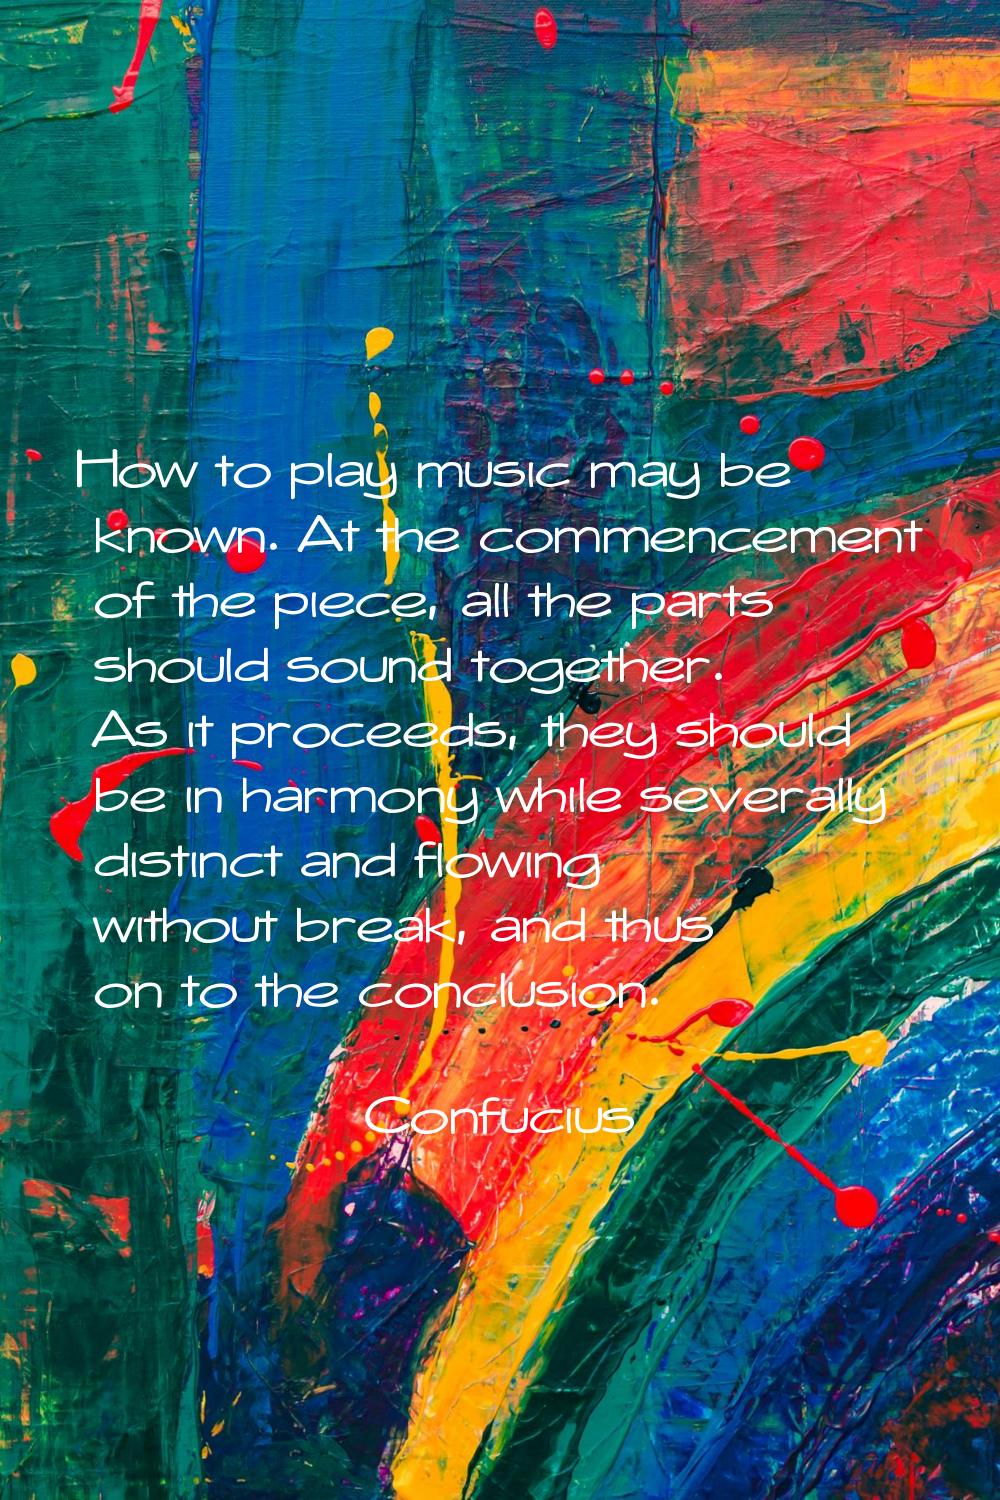 How to play music may be known. At the commencement of the piece, all the parts should sound togeth